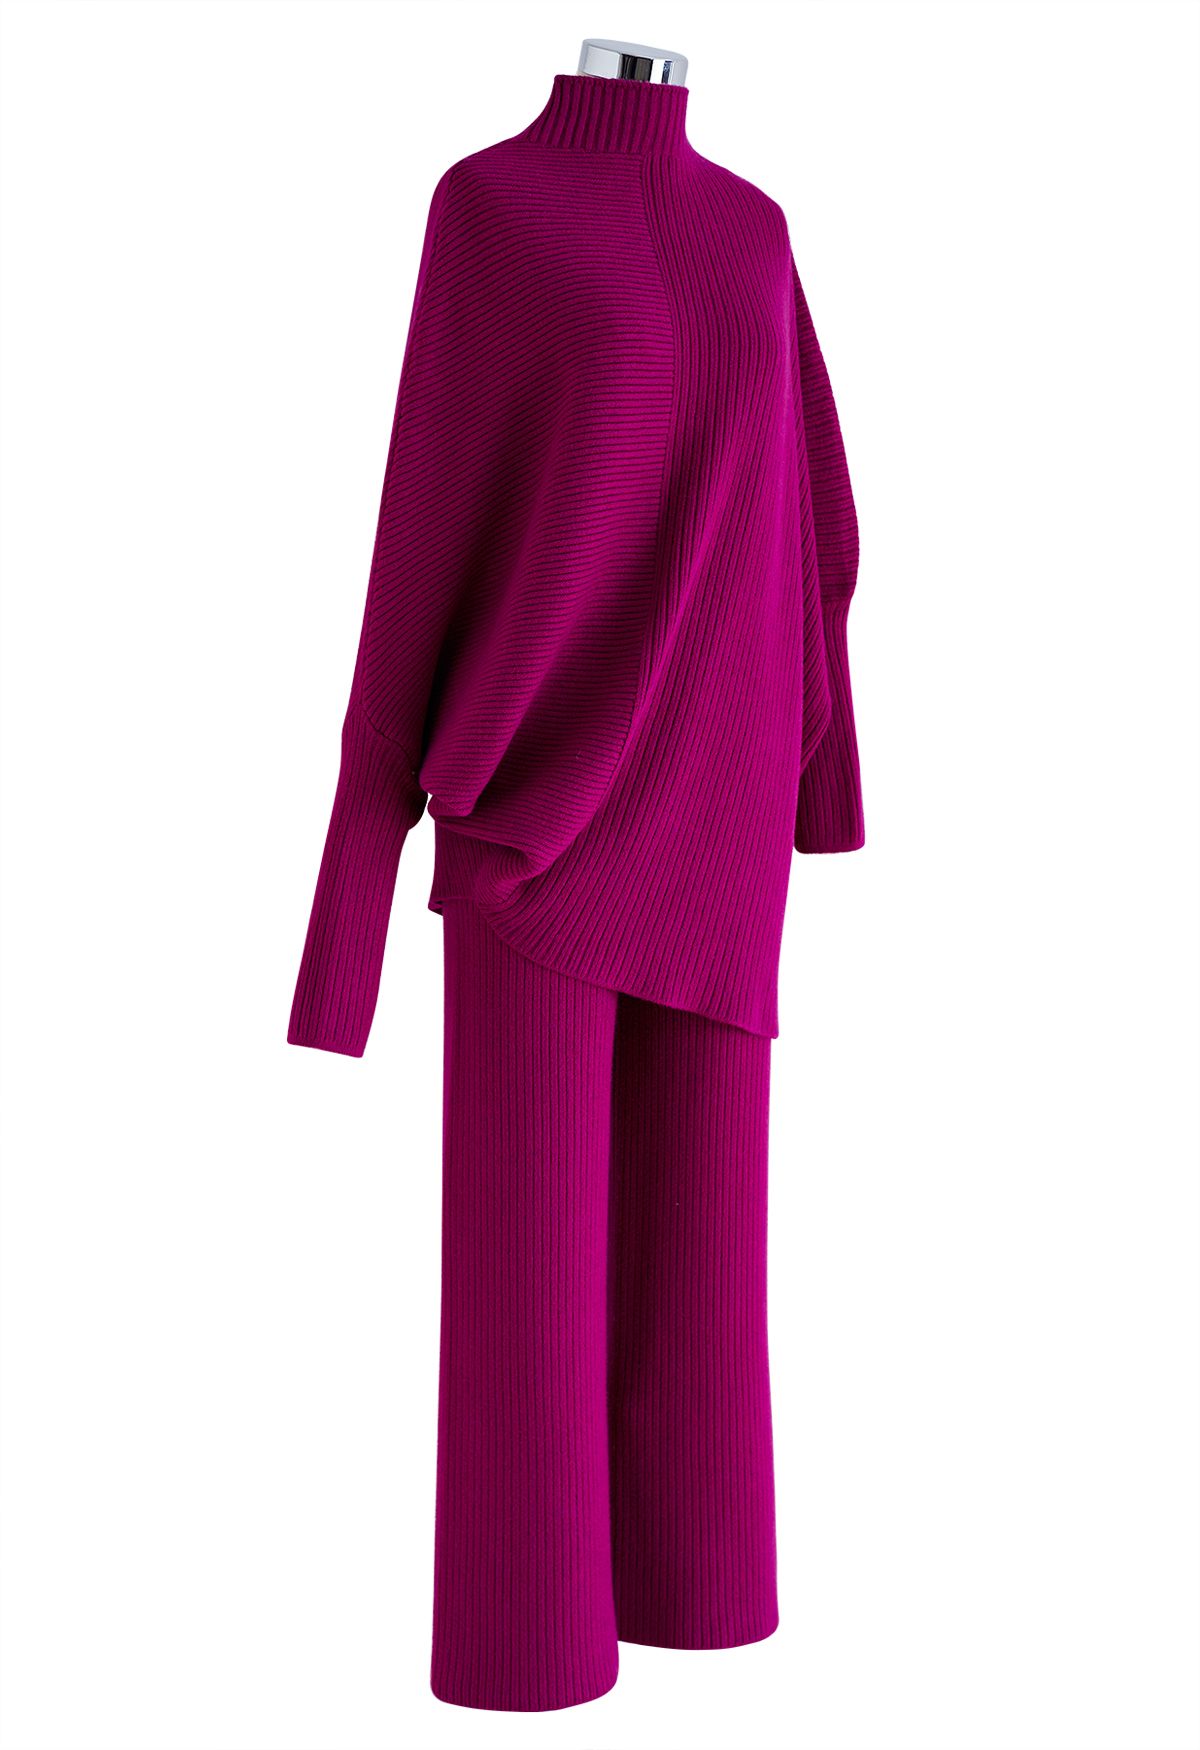 Asymmetric Batwing Sleeve Sweater and Pants Knit Set in Magenta